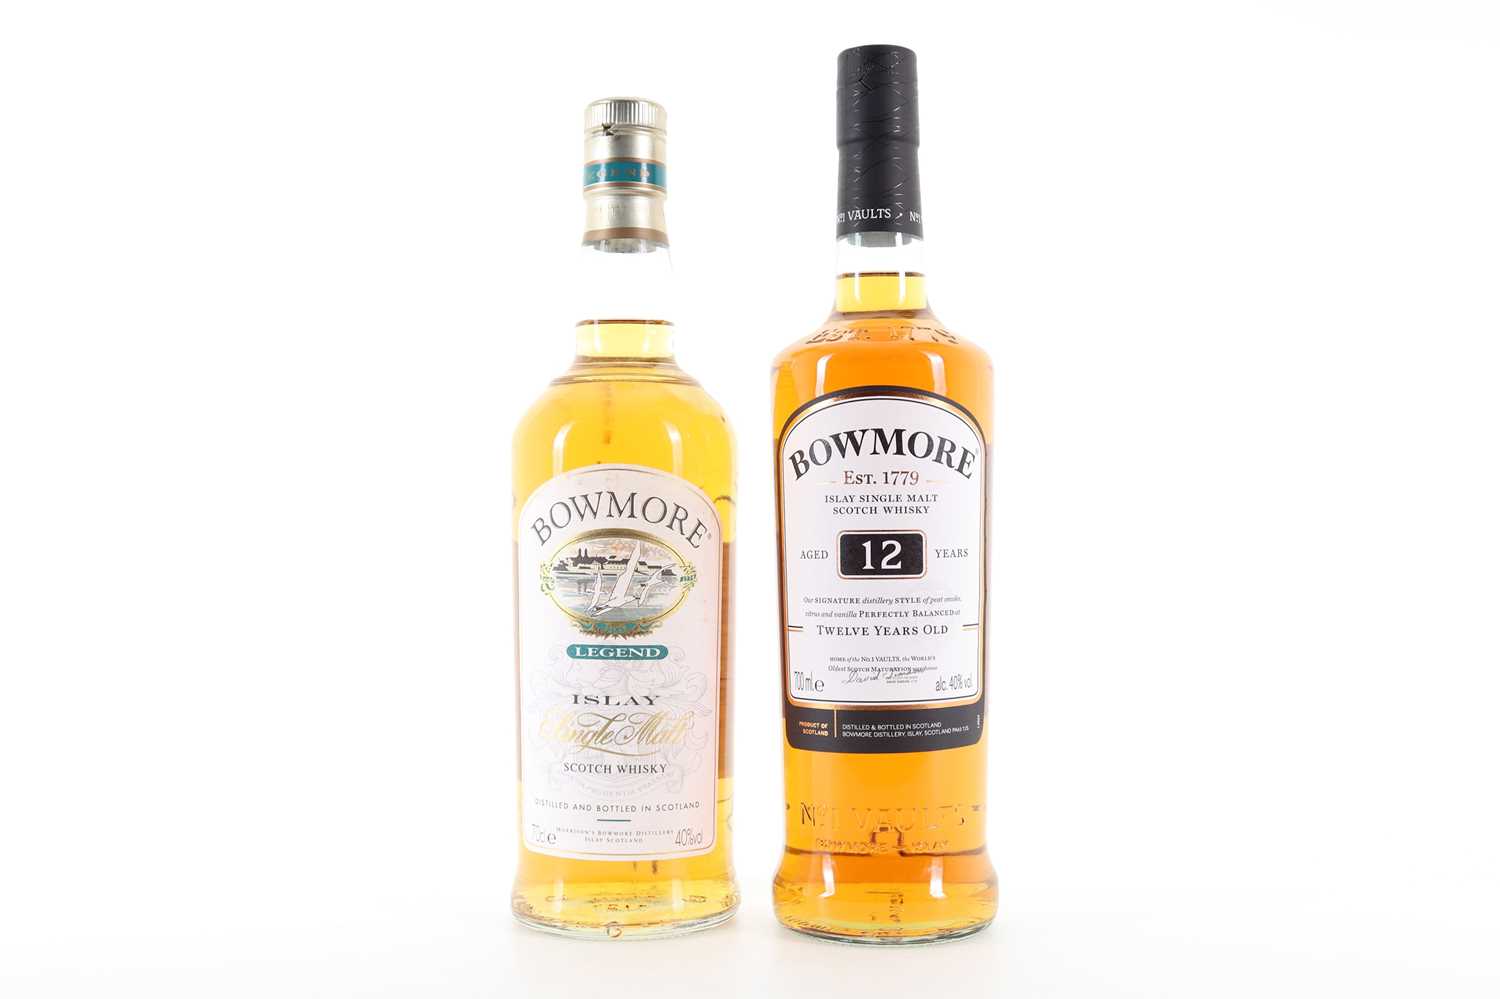 Lot 59 - BOWMORE LEGEND AND BOWMORE 12 YEAR OLD